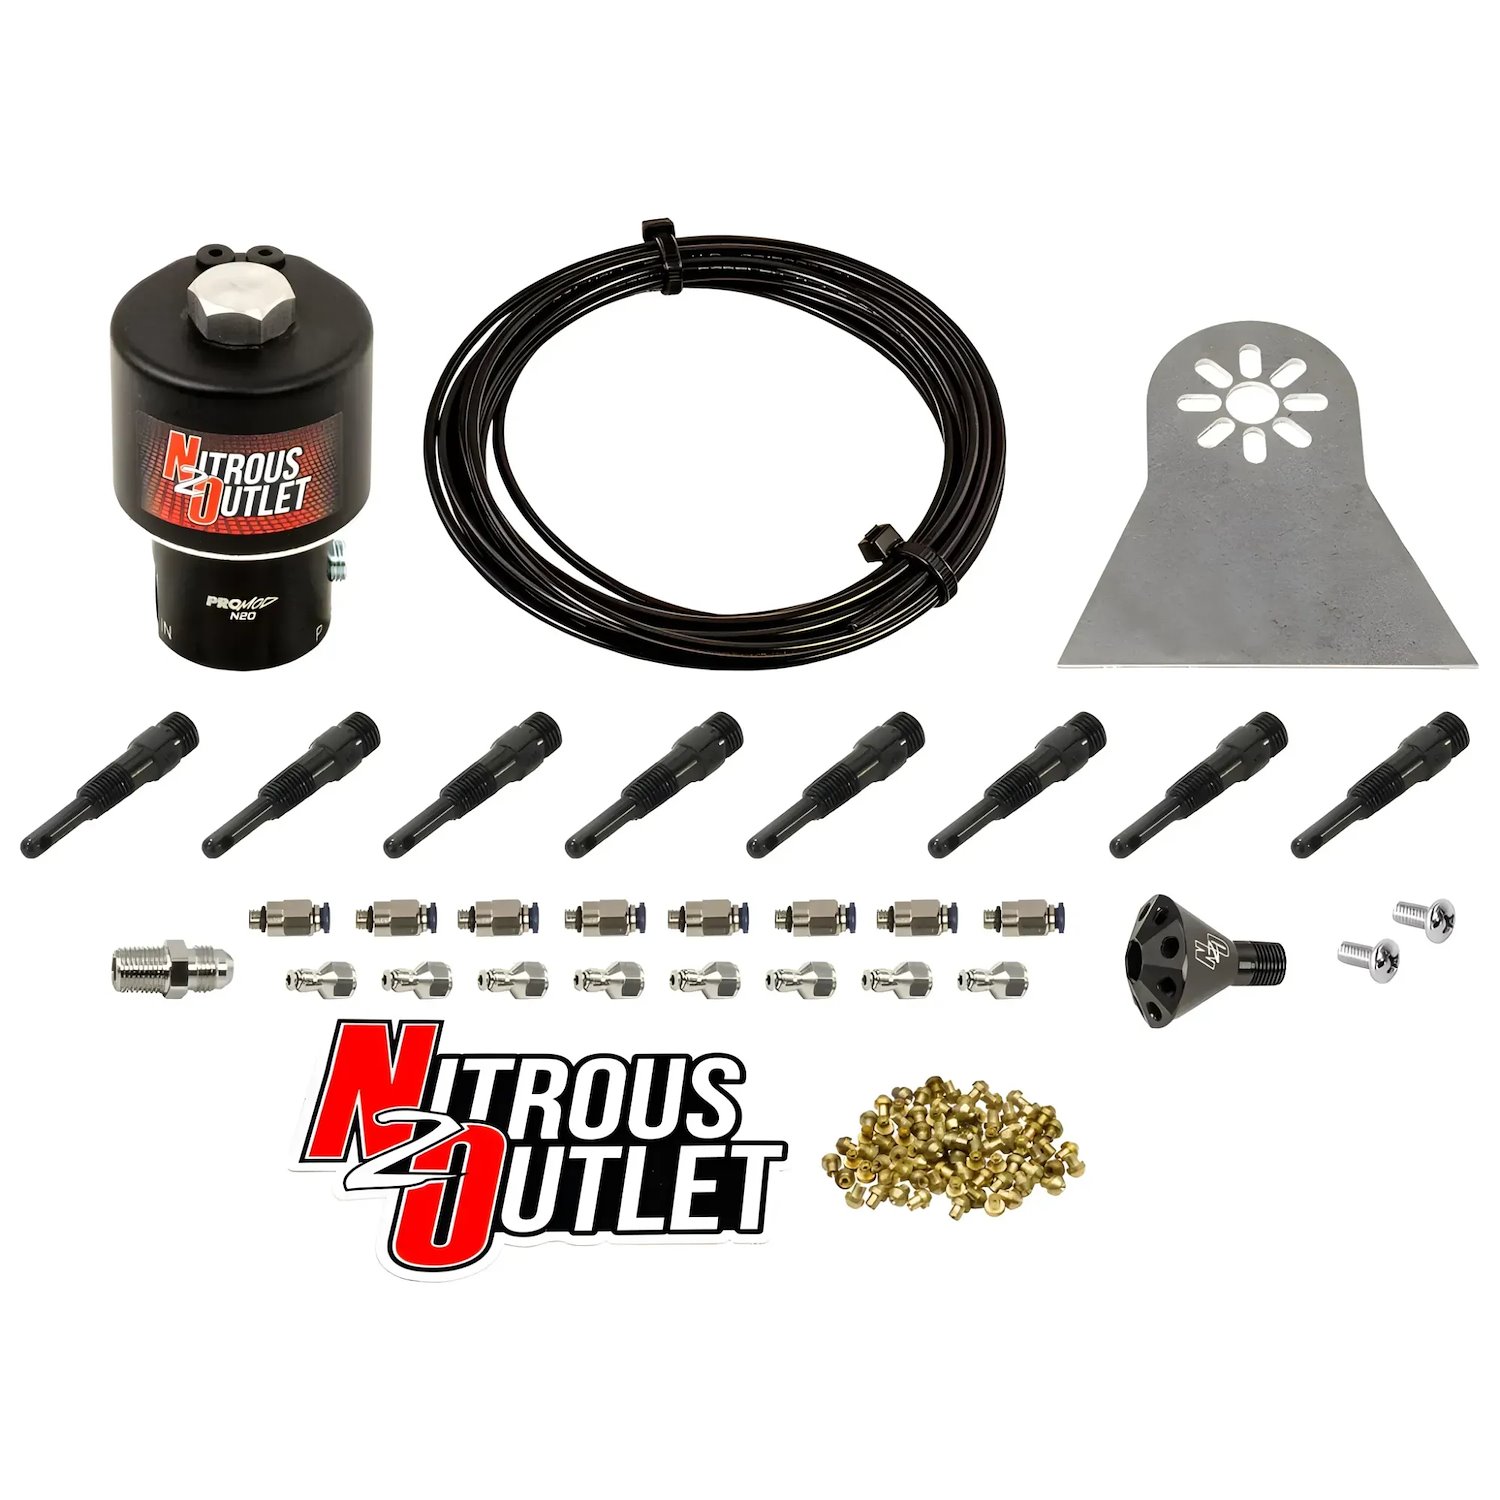 00-10483-T Dry 8-Cyl Solenoids Forward Direct Port Conversion Kit, .178 Trashcan Nitrous Solenoid